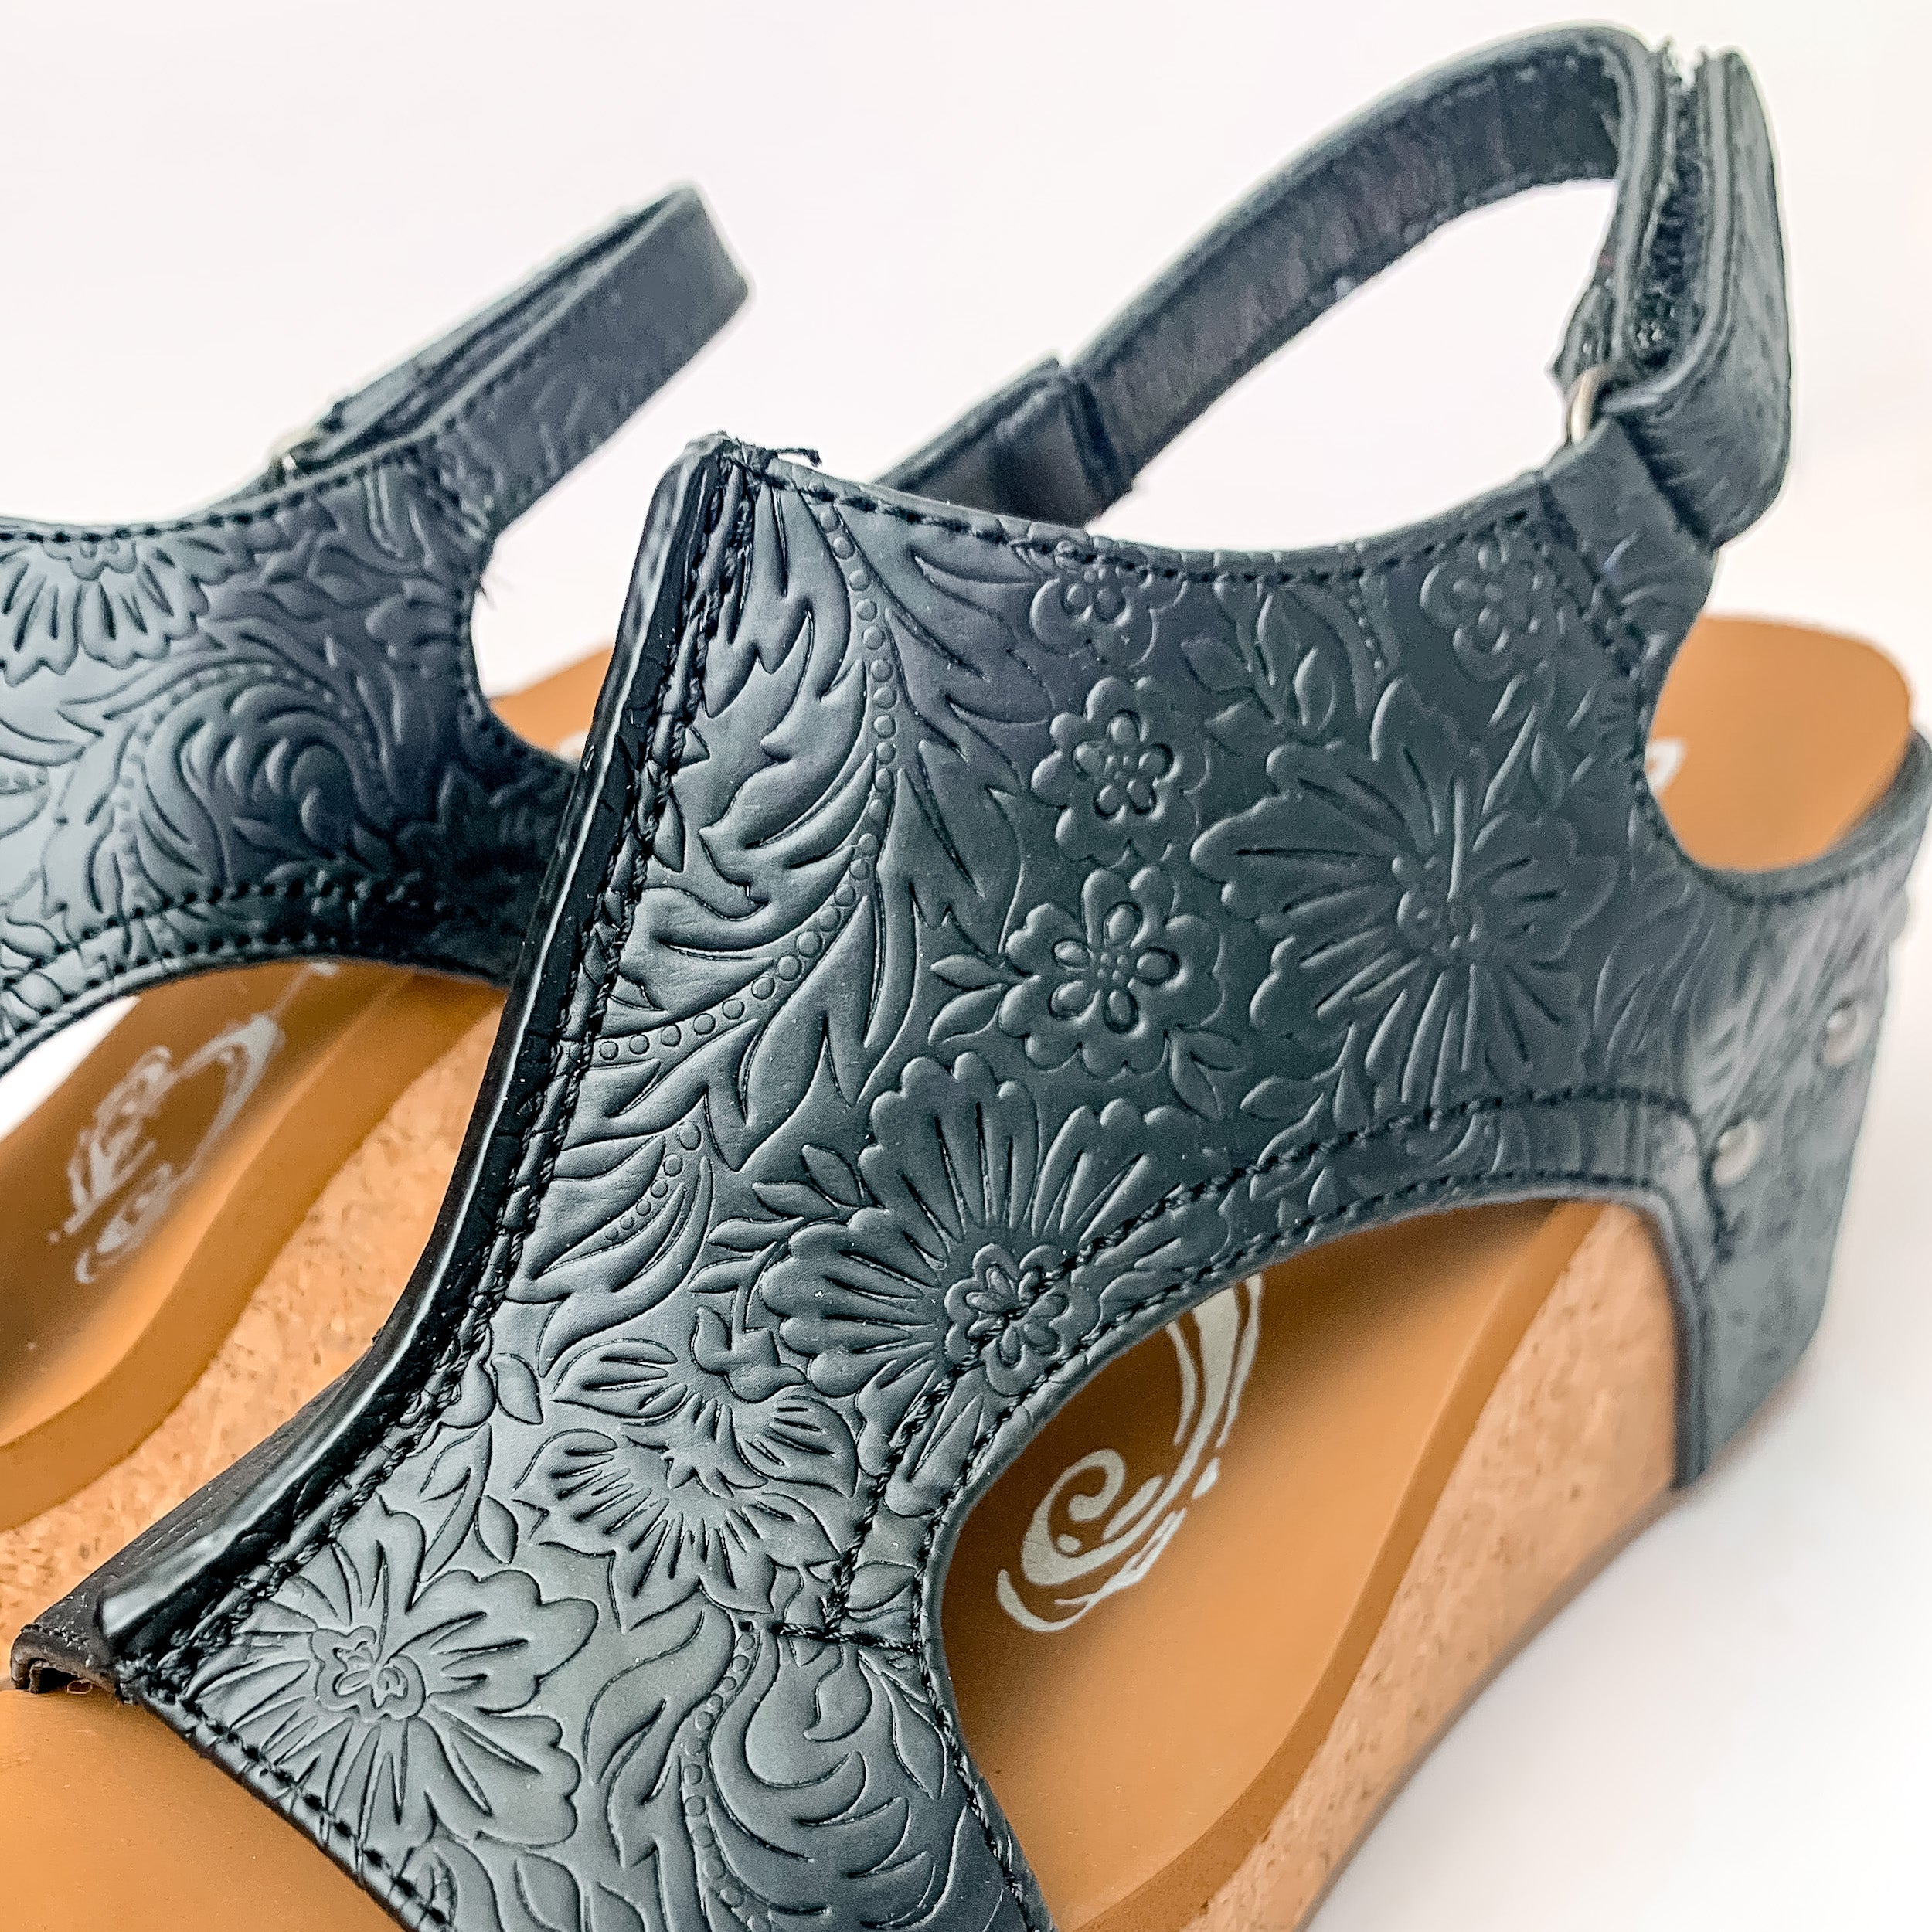 Very G | Trading Secrets Wedge Sandal with Velcro Strap in Tooled Black